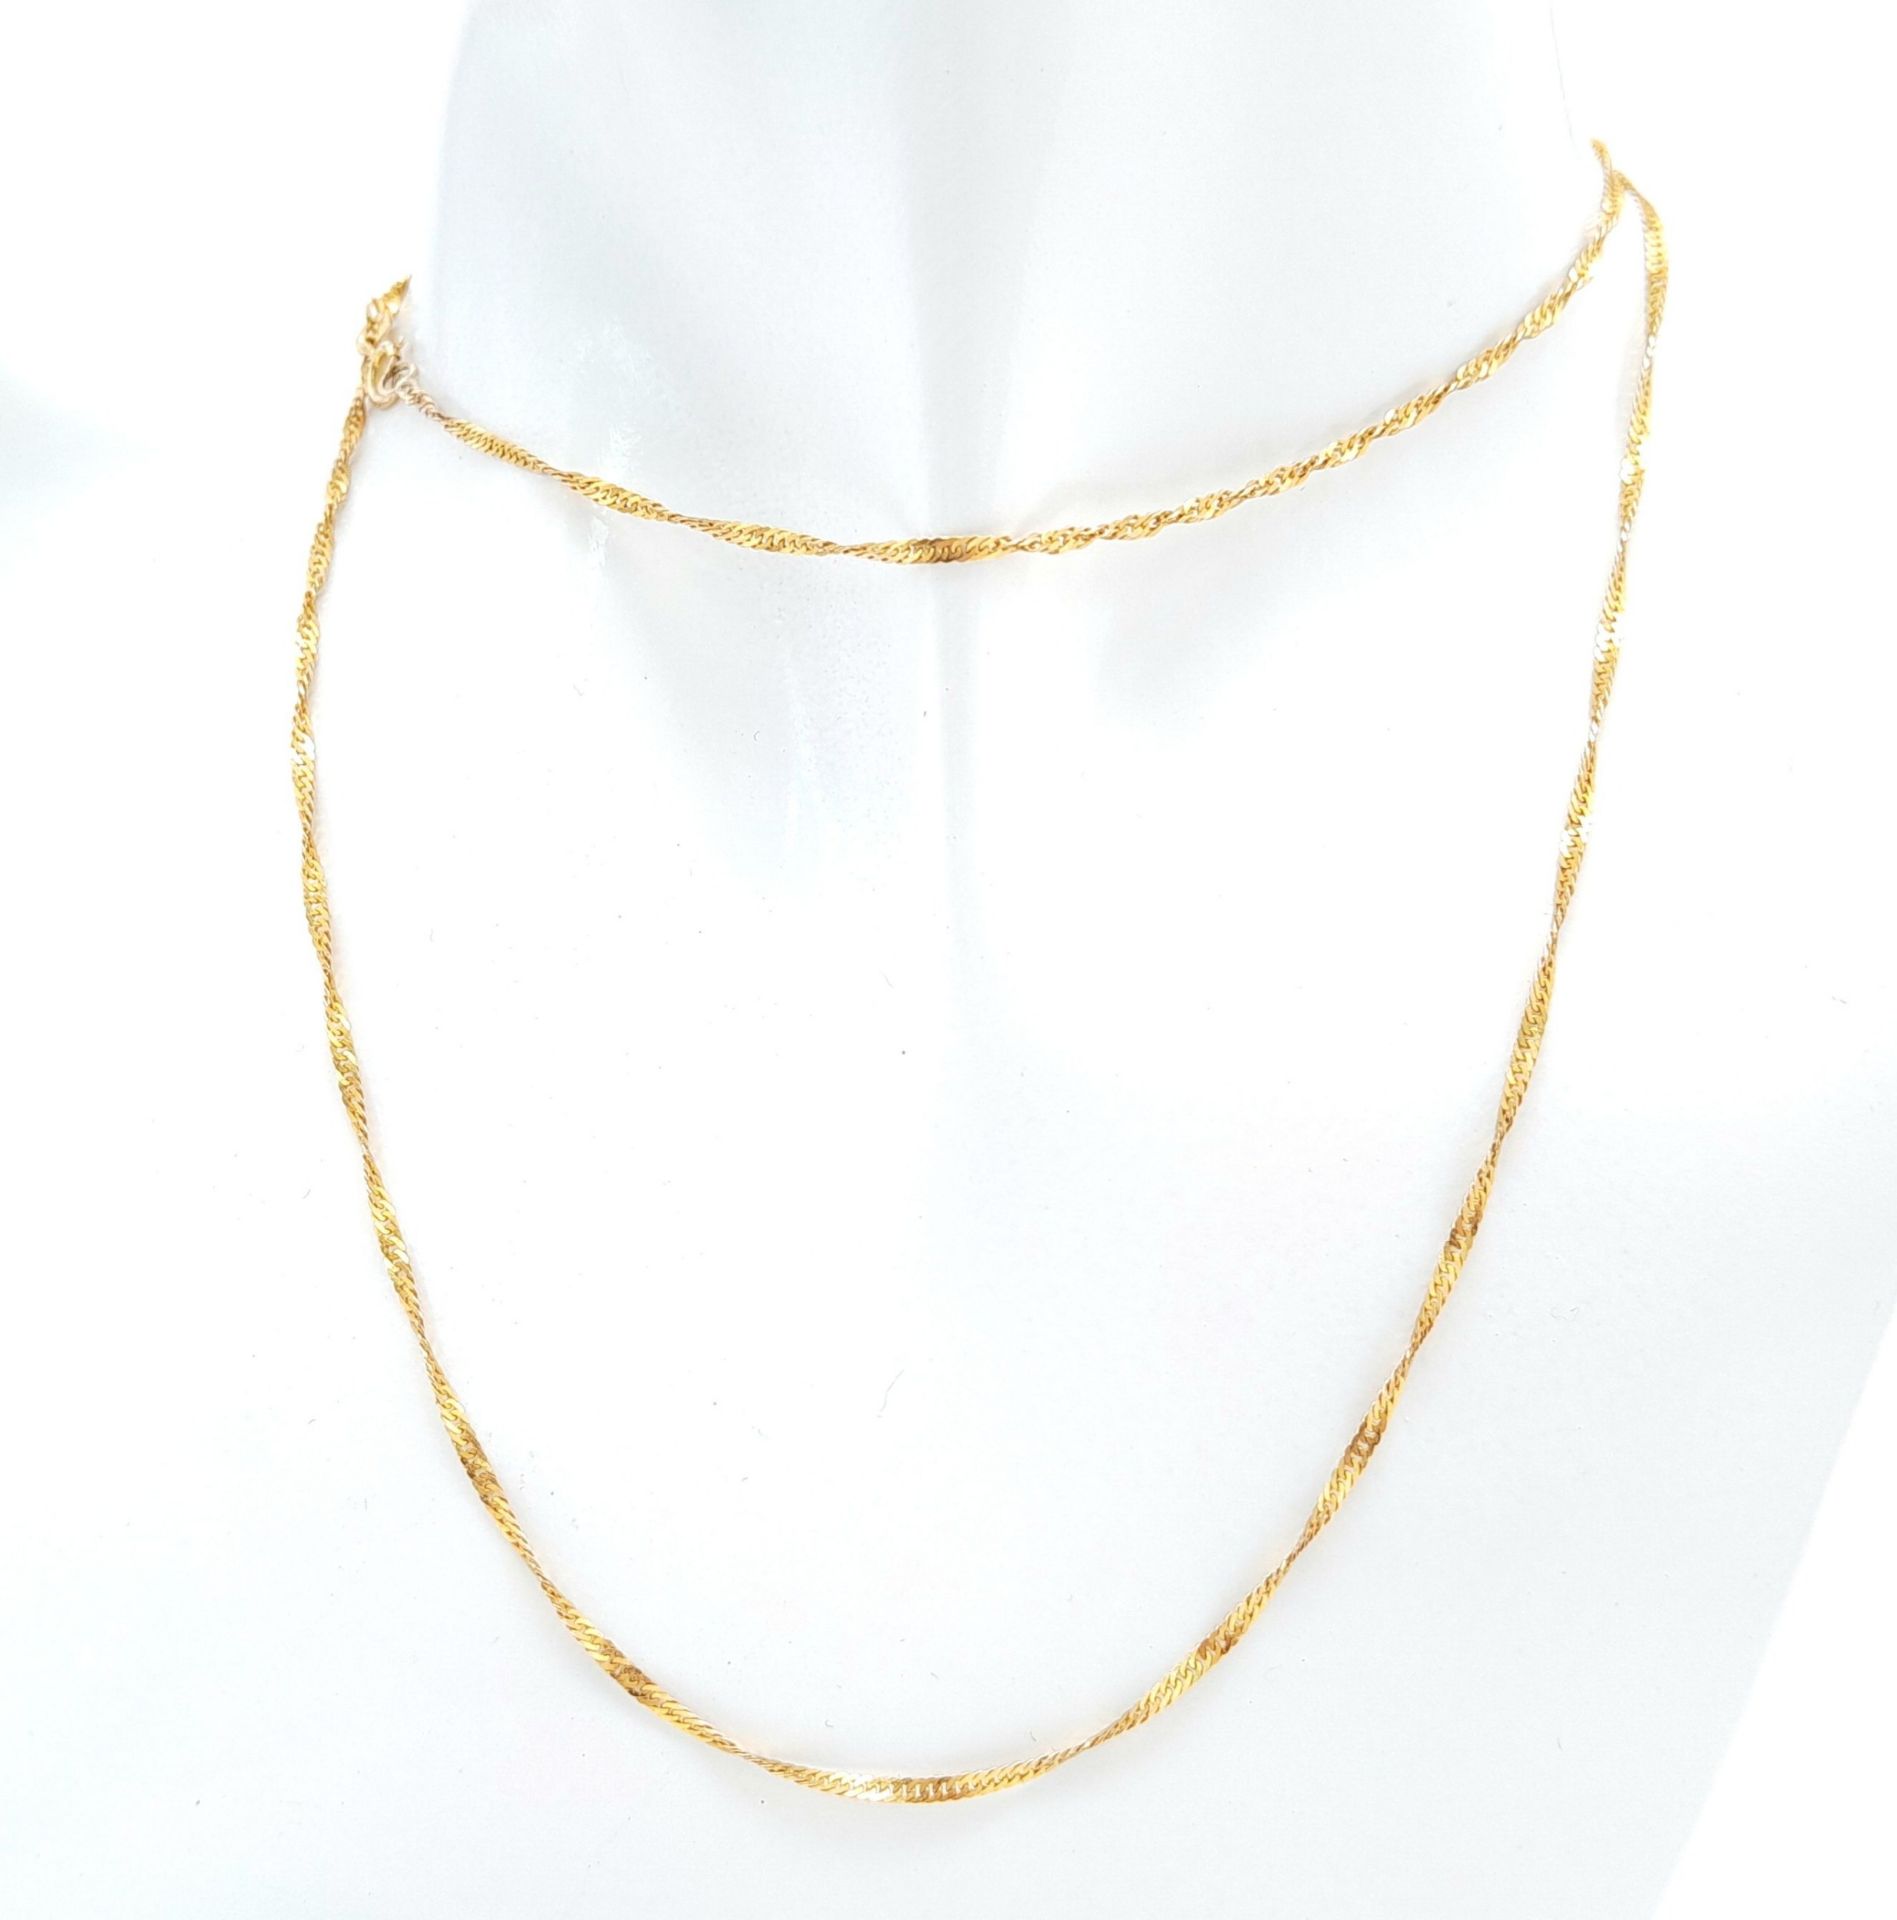 An elegant 9 K yellow gold rope chain necklace, length: 61 cm, weight: 2.3 g. - Image 7 of 11